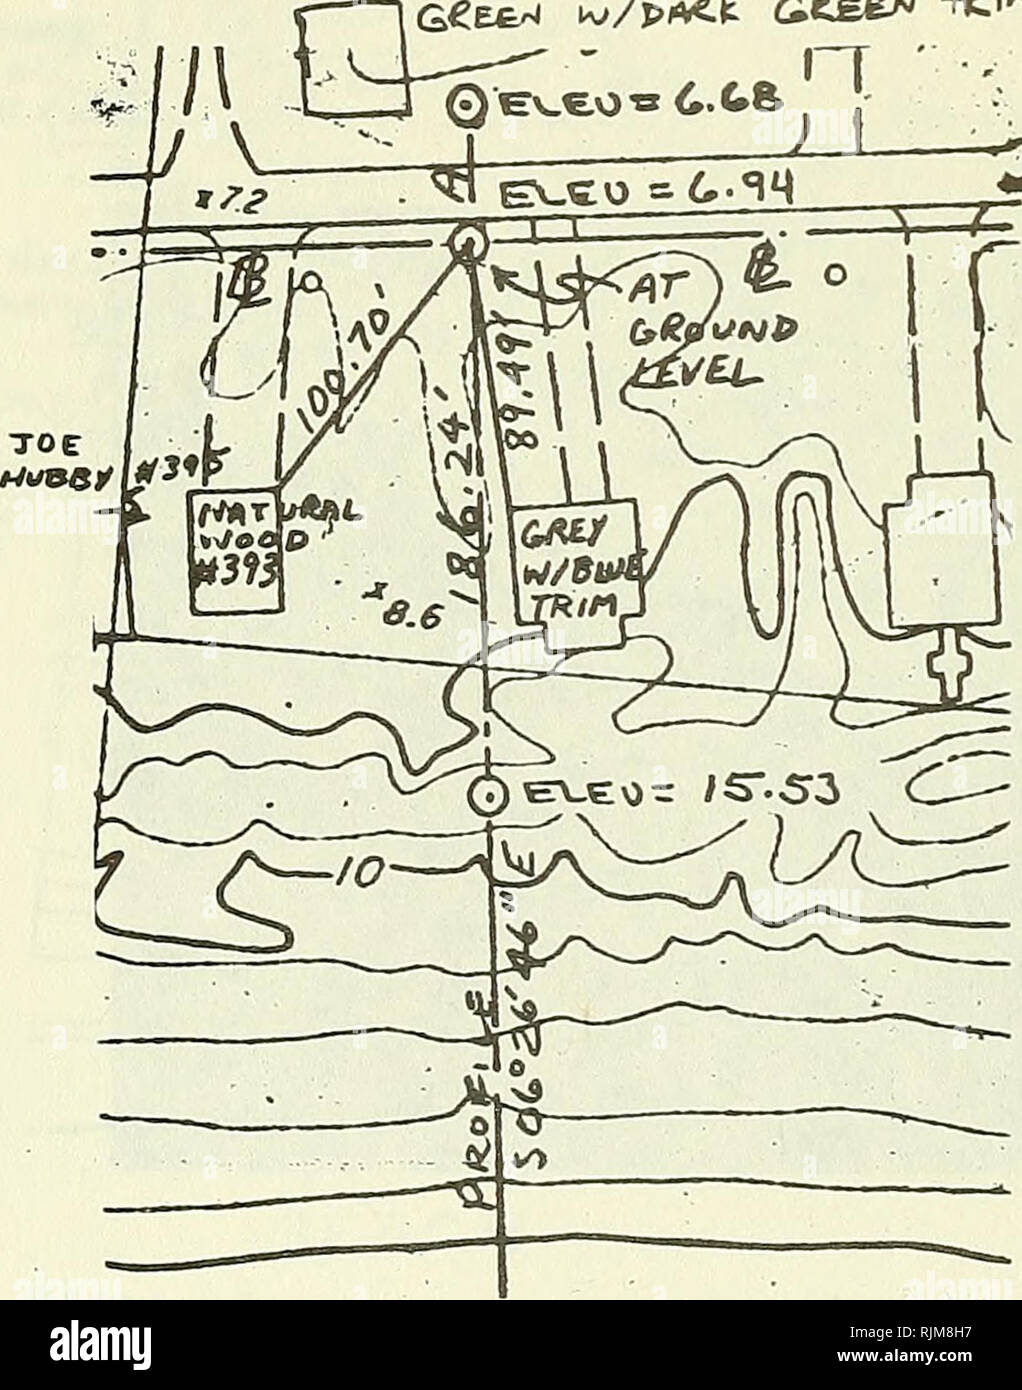 . Beach changes at Holden Beach, North Carolina, 1970-74. Coast changes; Shore protection. COUNTRY TYPE OF MARK G/&gt;i.i/. PIPE STATION ICO-I- IS, 7C PR6FIUE 9 LOCALITY N.C. STAMPING ON MARK AGENCY (CAST IN MARKS) ELEVATION 6.94- LATITUDE LONGITUDE 72-17-3^.0^3 DATUM HotiTH miRicPk I1Z7 DATUM /929 (f^S.L) niEASTING) Â»)(NORTHING) 59(&gt;f3.80O GRID AND ZONE ESTABLISHED BY (AGENCY) INORTHINGXEASTINGI (EASTINGXNORTHING) GRID AND ZONE DATE 1970 ORDER rif/Rt&gt; GRID AZIMUTH, ADD TO THE GEODETIC AZIMUTH TO OBTAIN GRID AZ. (ADD)(SUB.) TO THE GEODETIC AZIMUTH AZIMUTH OR DIRECTION (GEODETICXGRIO) (M Stock Photo